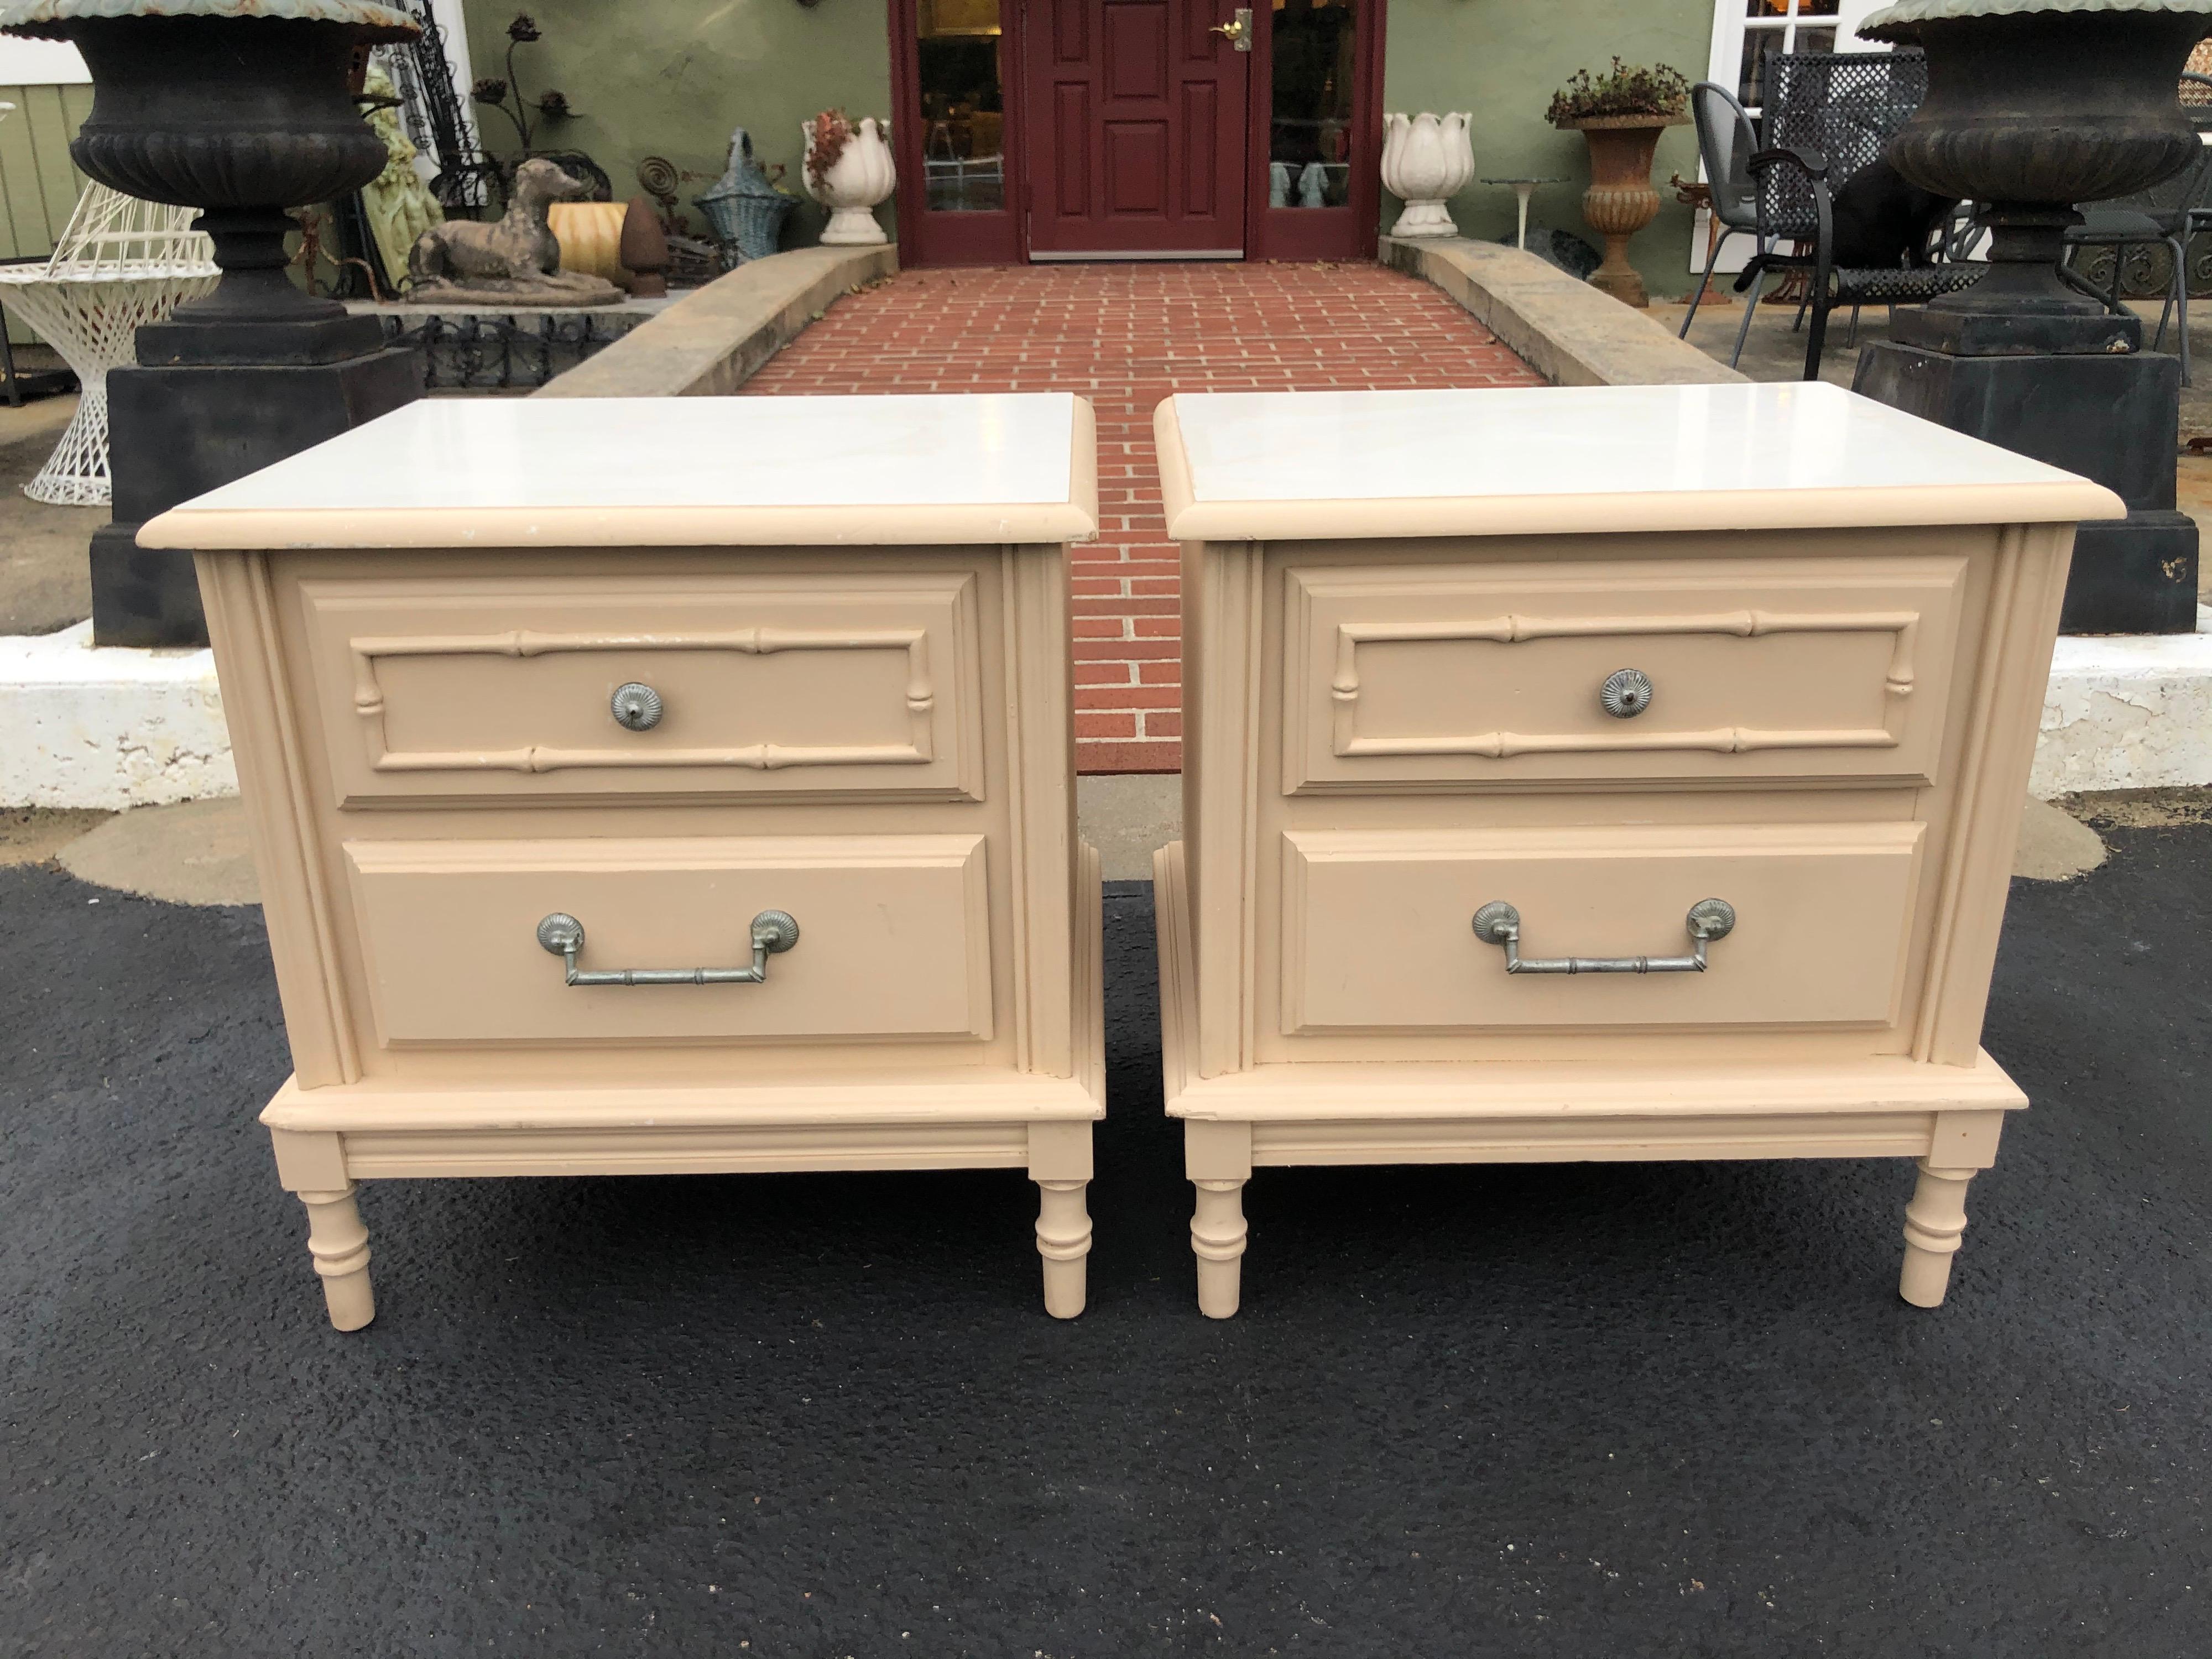 Pair of faux bamboo nightstands in the style of Henry Link. Classic lines and design. We think these would be amazing in a gloss gray. White laminate top with decorative silver toned hardware. Currently painted in a soft matte beige pink.


   